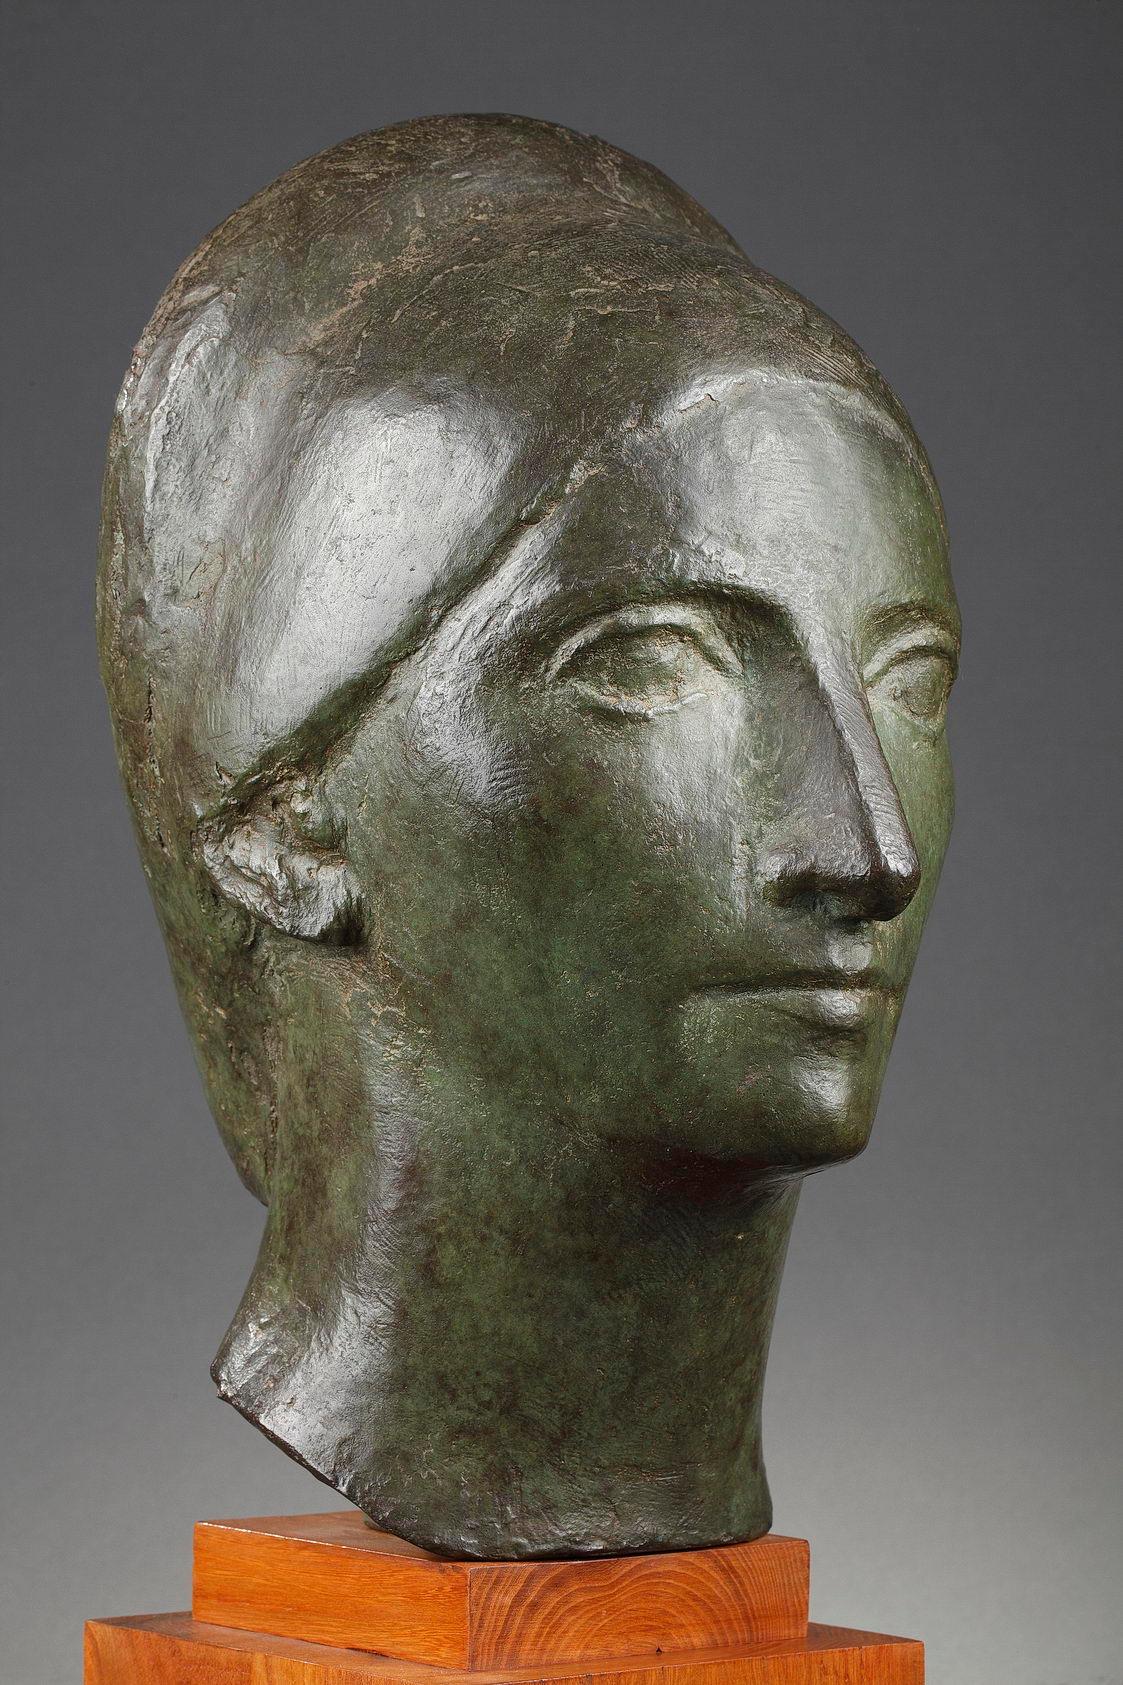 Portrait of Suzanne Vérité
by Marcel GIMOND (1894-1961)

Bronze sculpture with a nuanced green patina
signed on the neck 